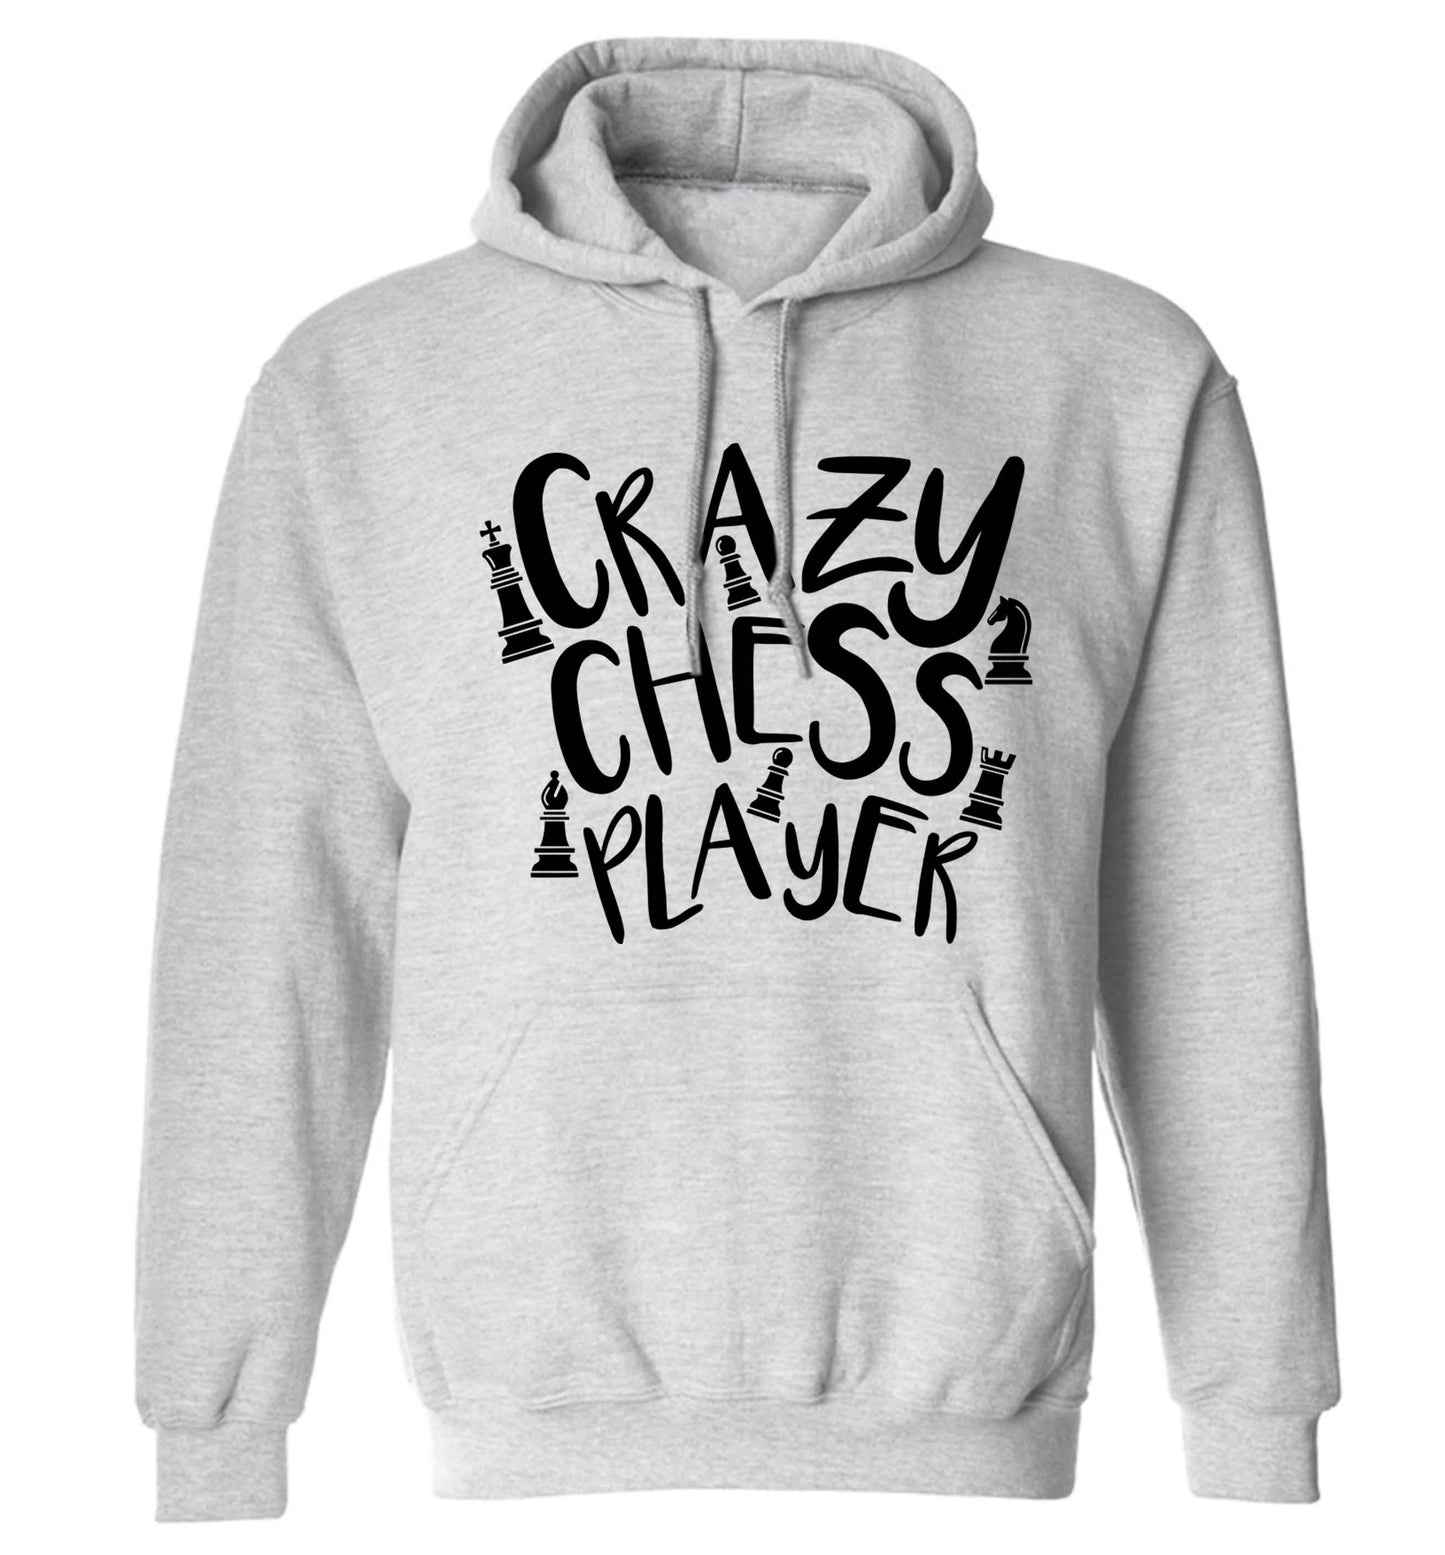 Crazy chess player adults unisex grey hoodie 2XL